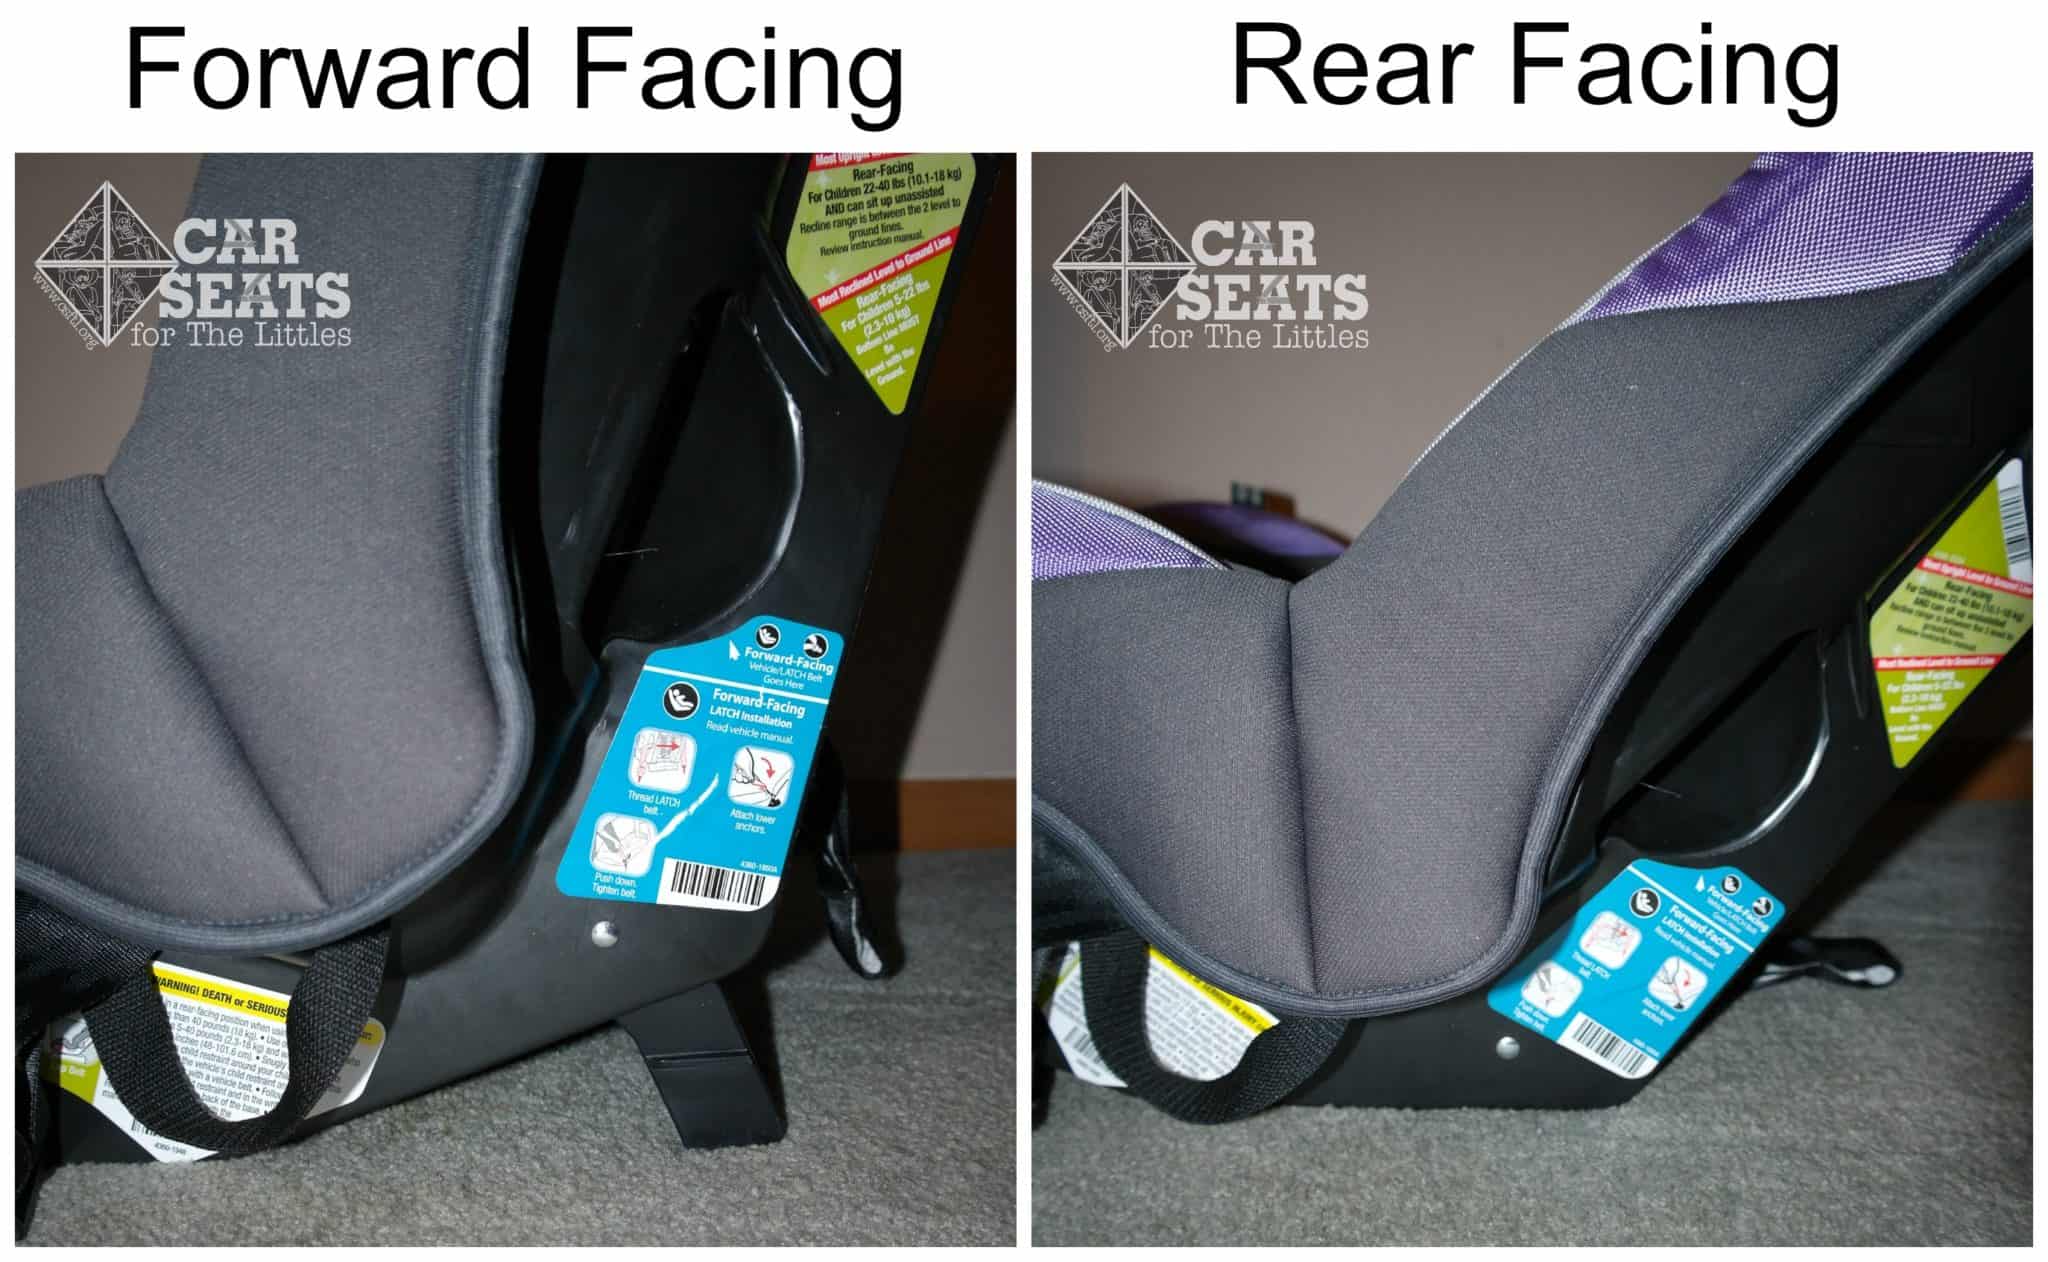 Your Guide To The 65 Car Seat Installation Seats For Littles - How To Install A Forward Facing Car Seat With Seatbelt